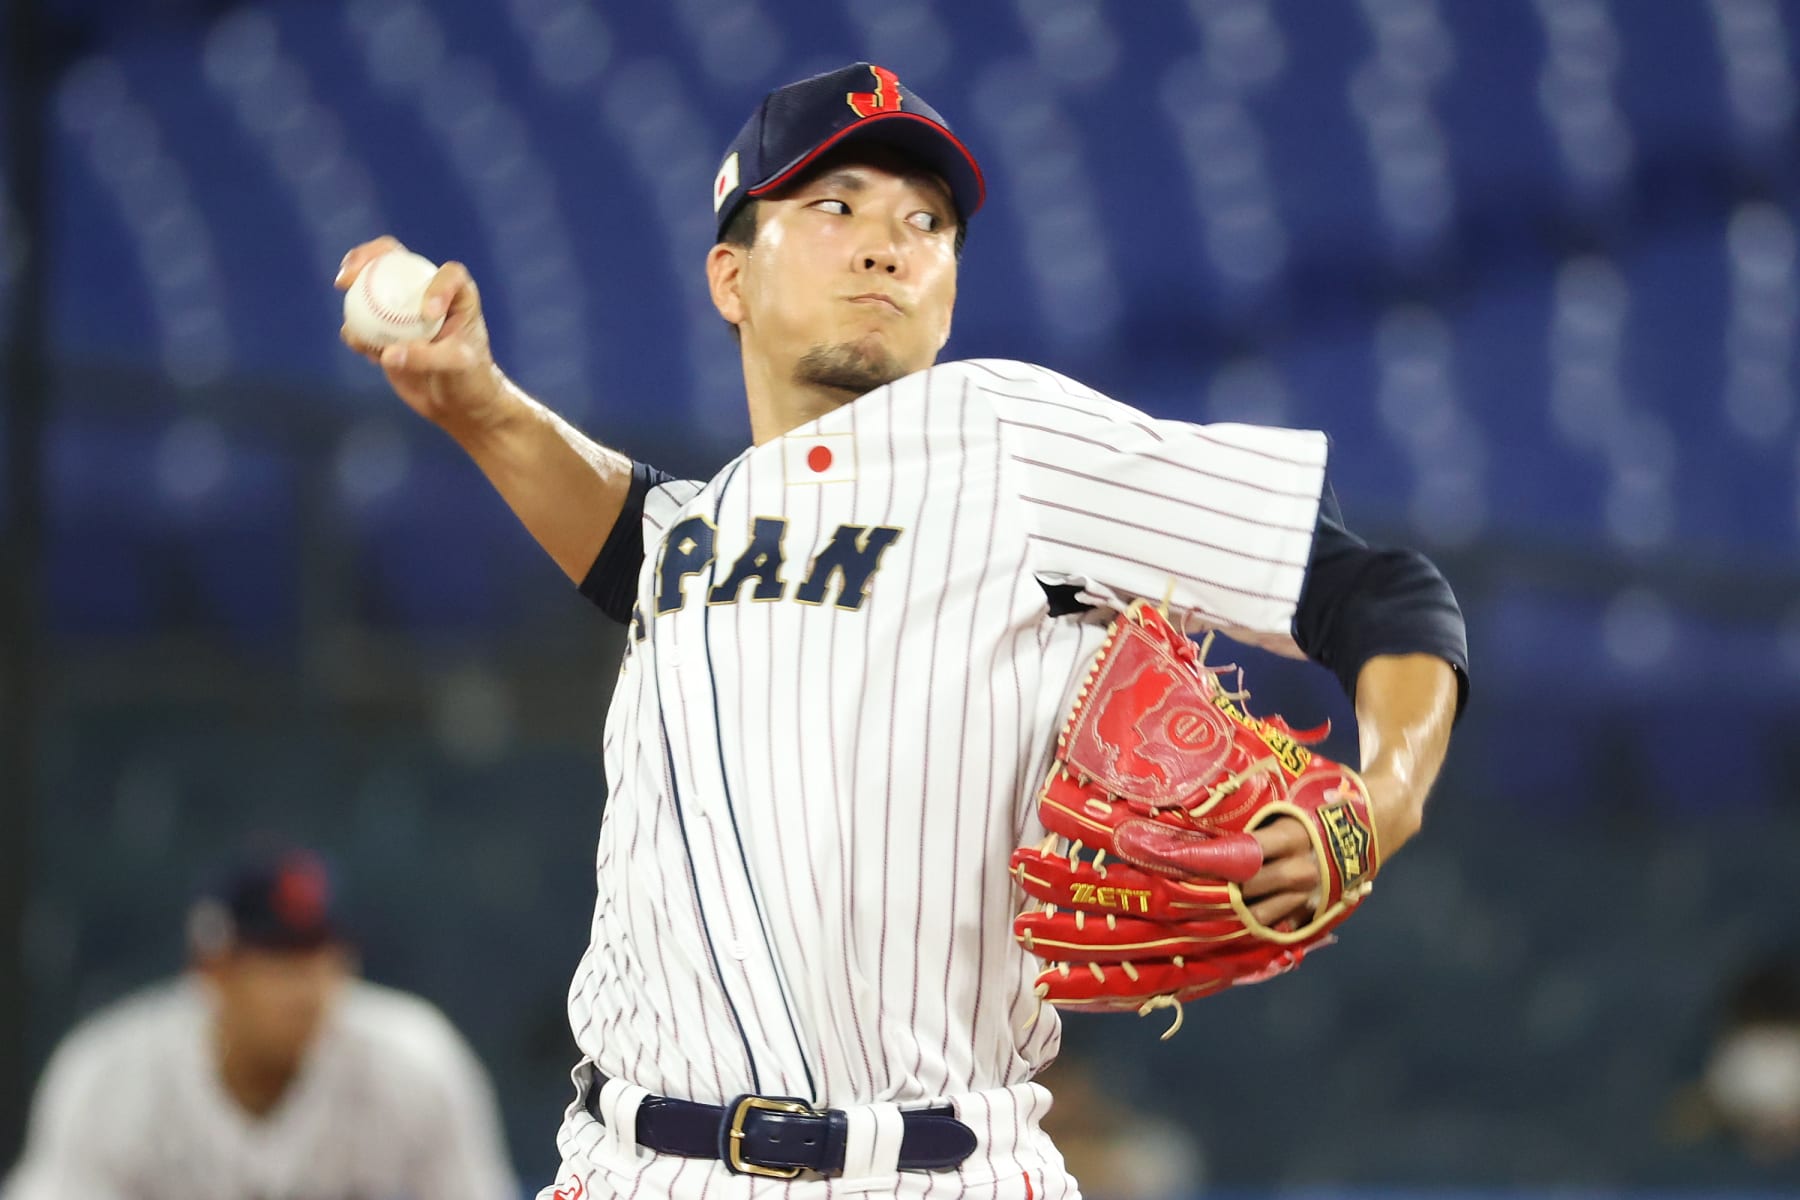 MLB on X: Kodai Senga and Seiya Suzuki face off tonight for the first time  in MLB. 🇯🇵 Watch live as the countrymen square off at 7:40 p.m. ET.   / X